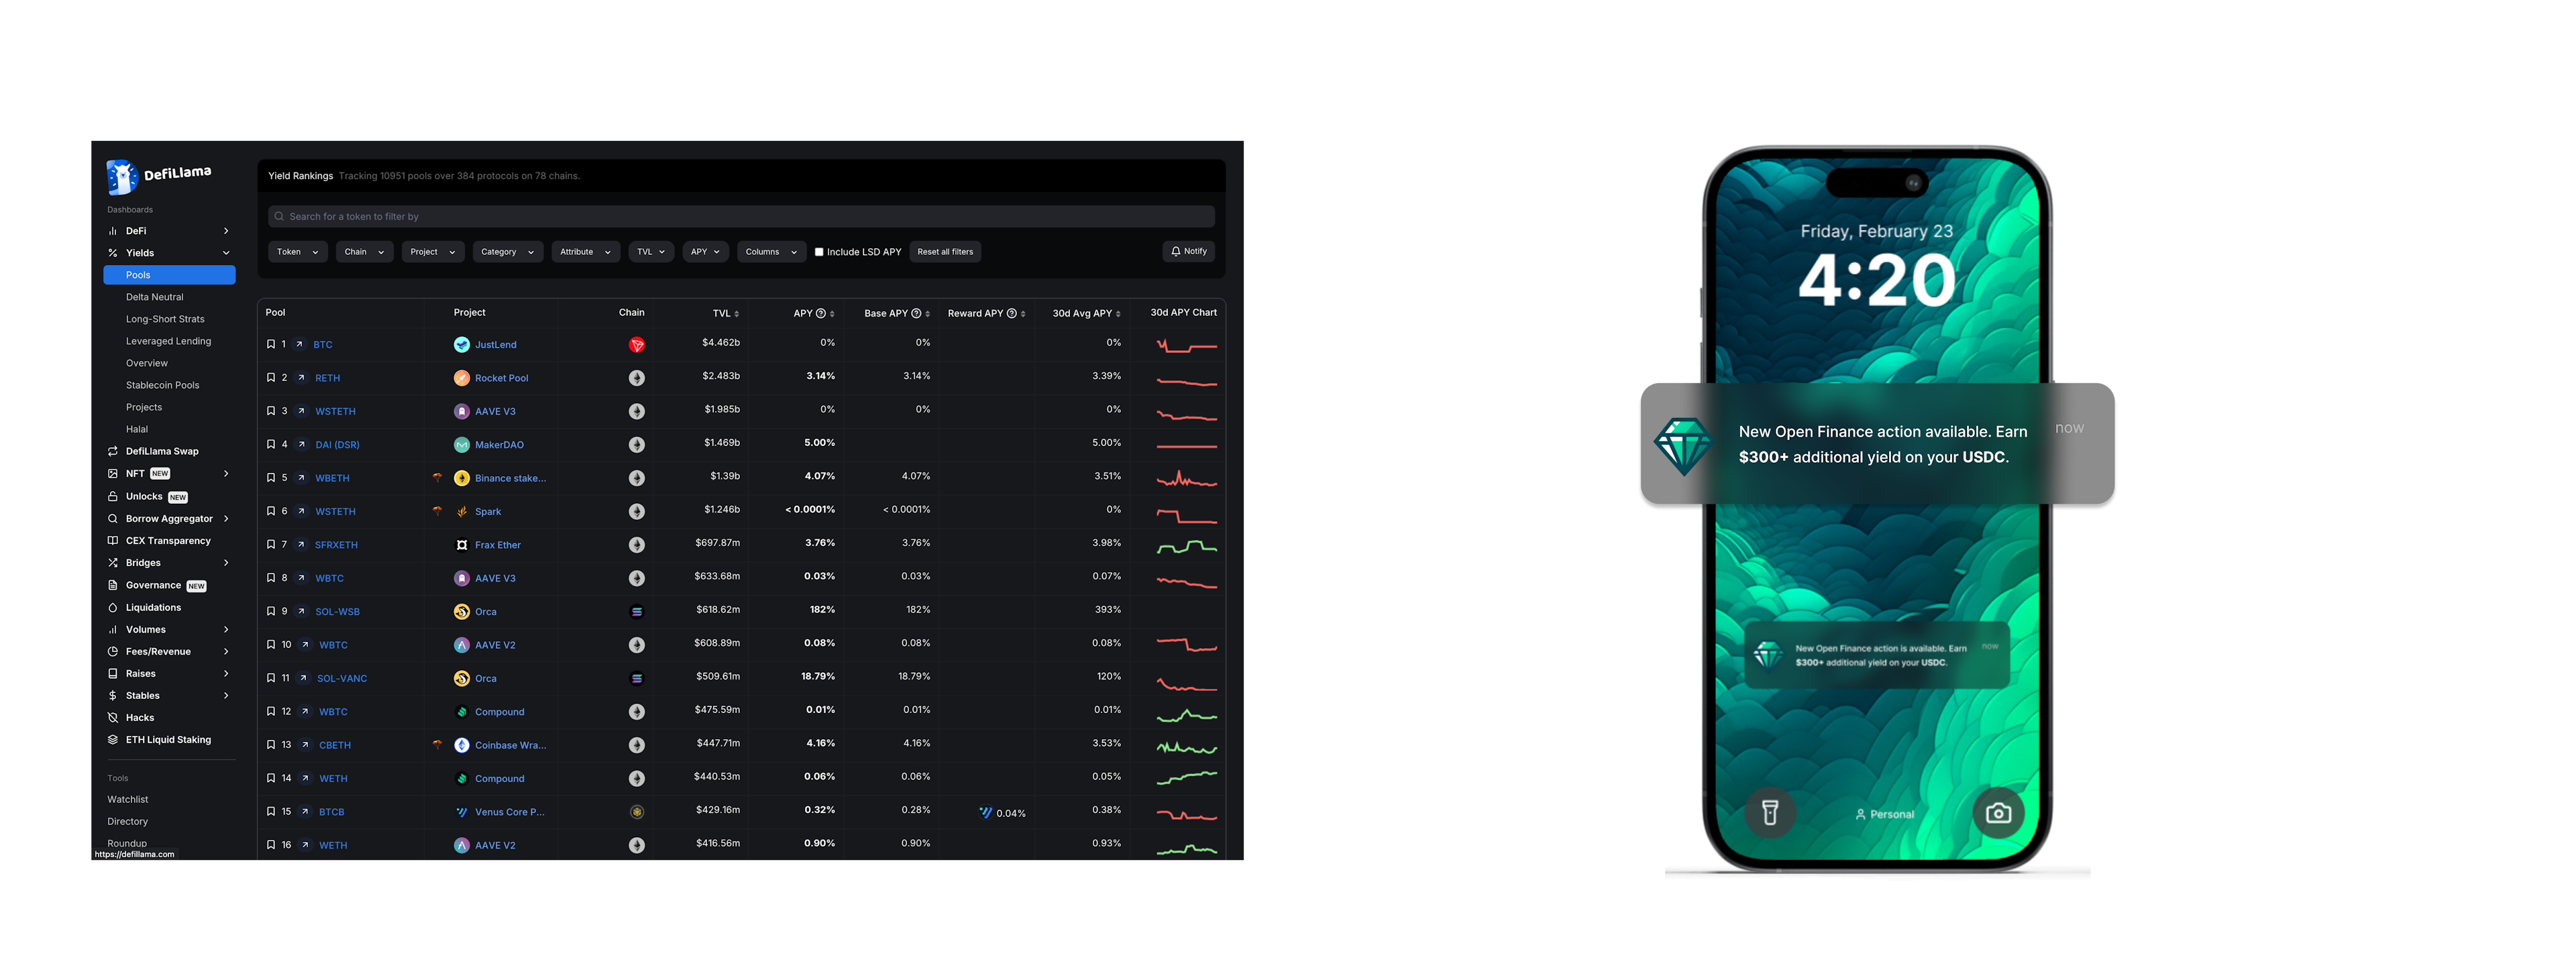 Using DeFi Llama for discovery vs using machines for discovery